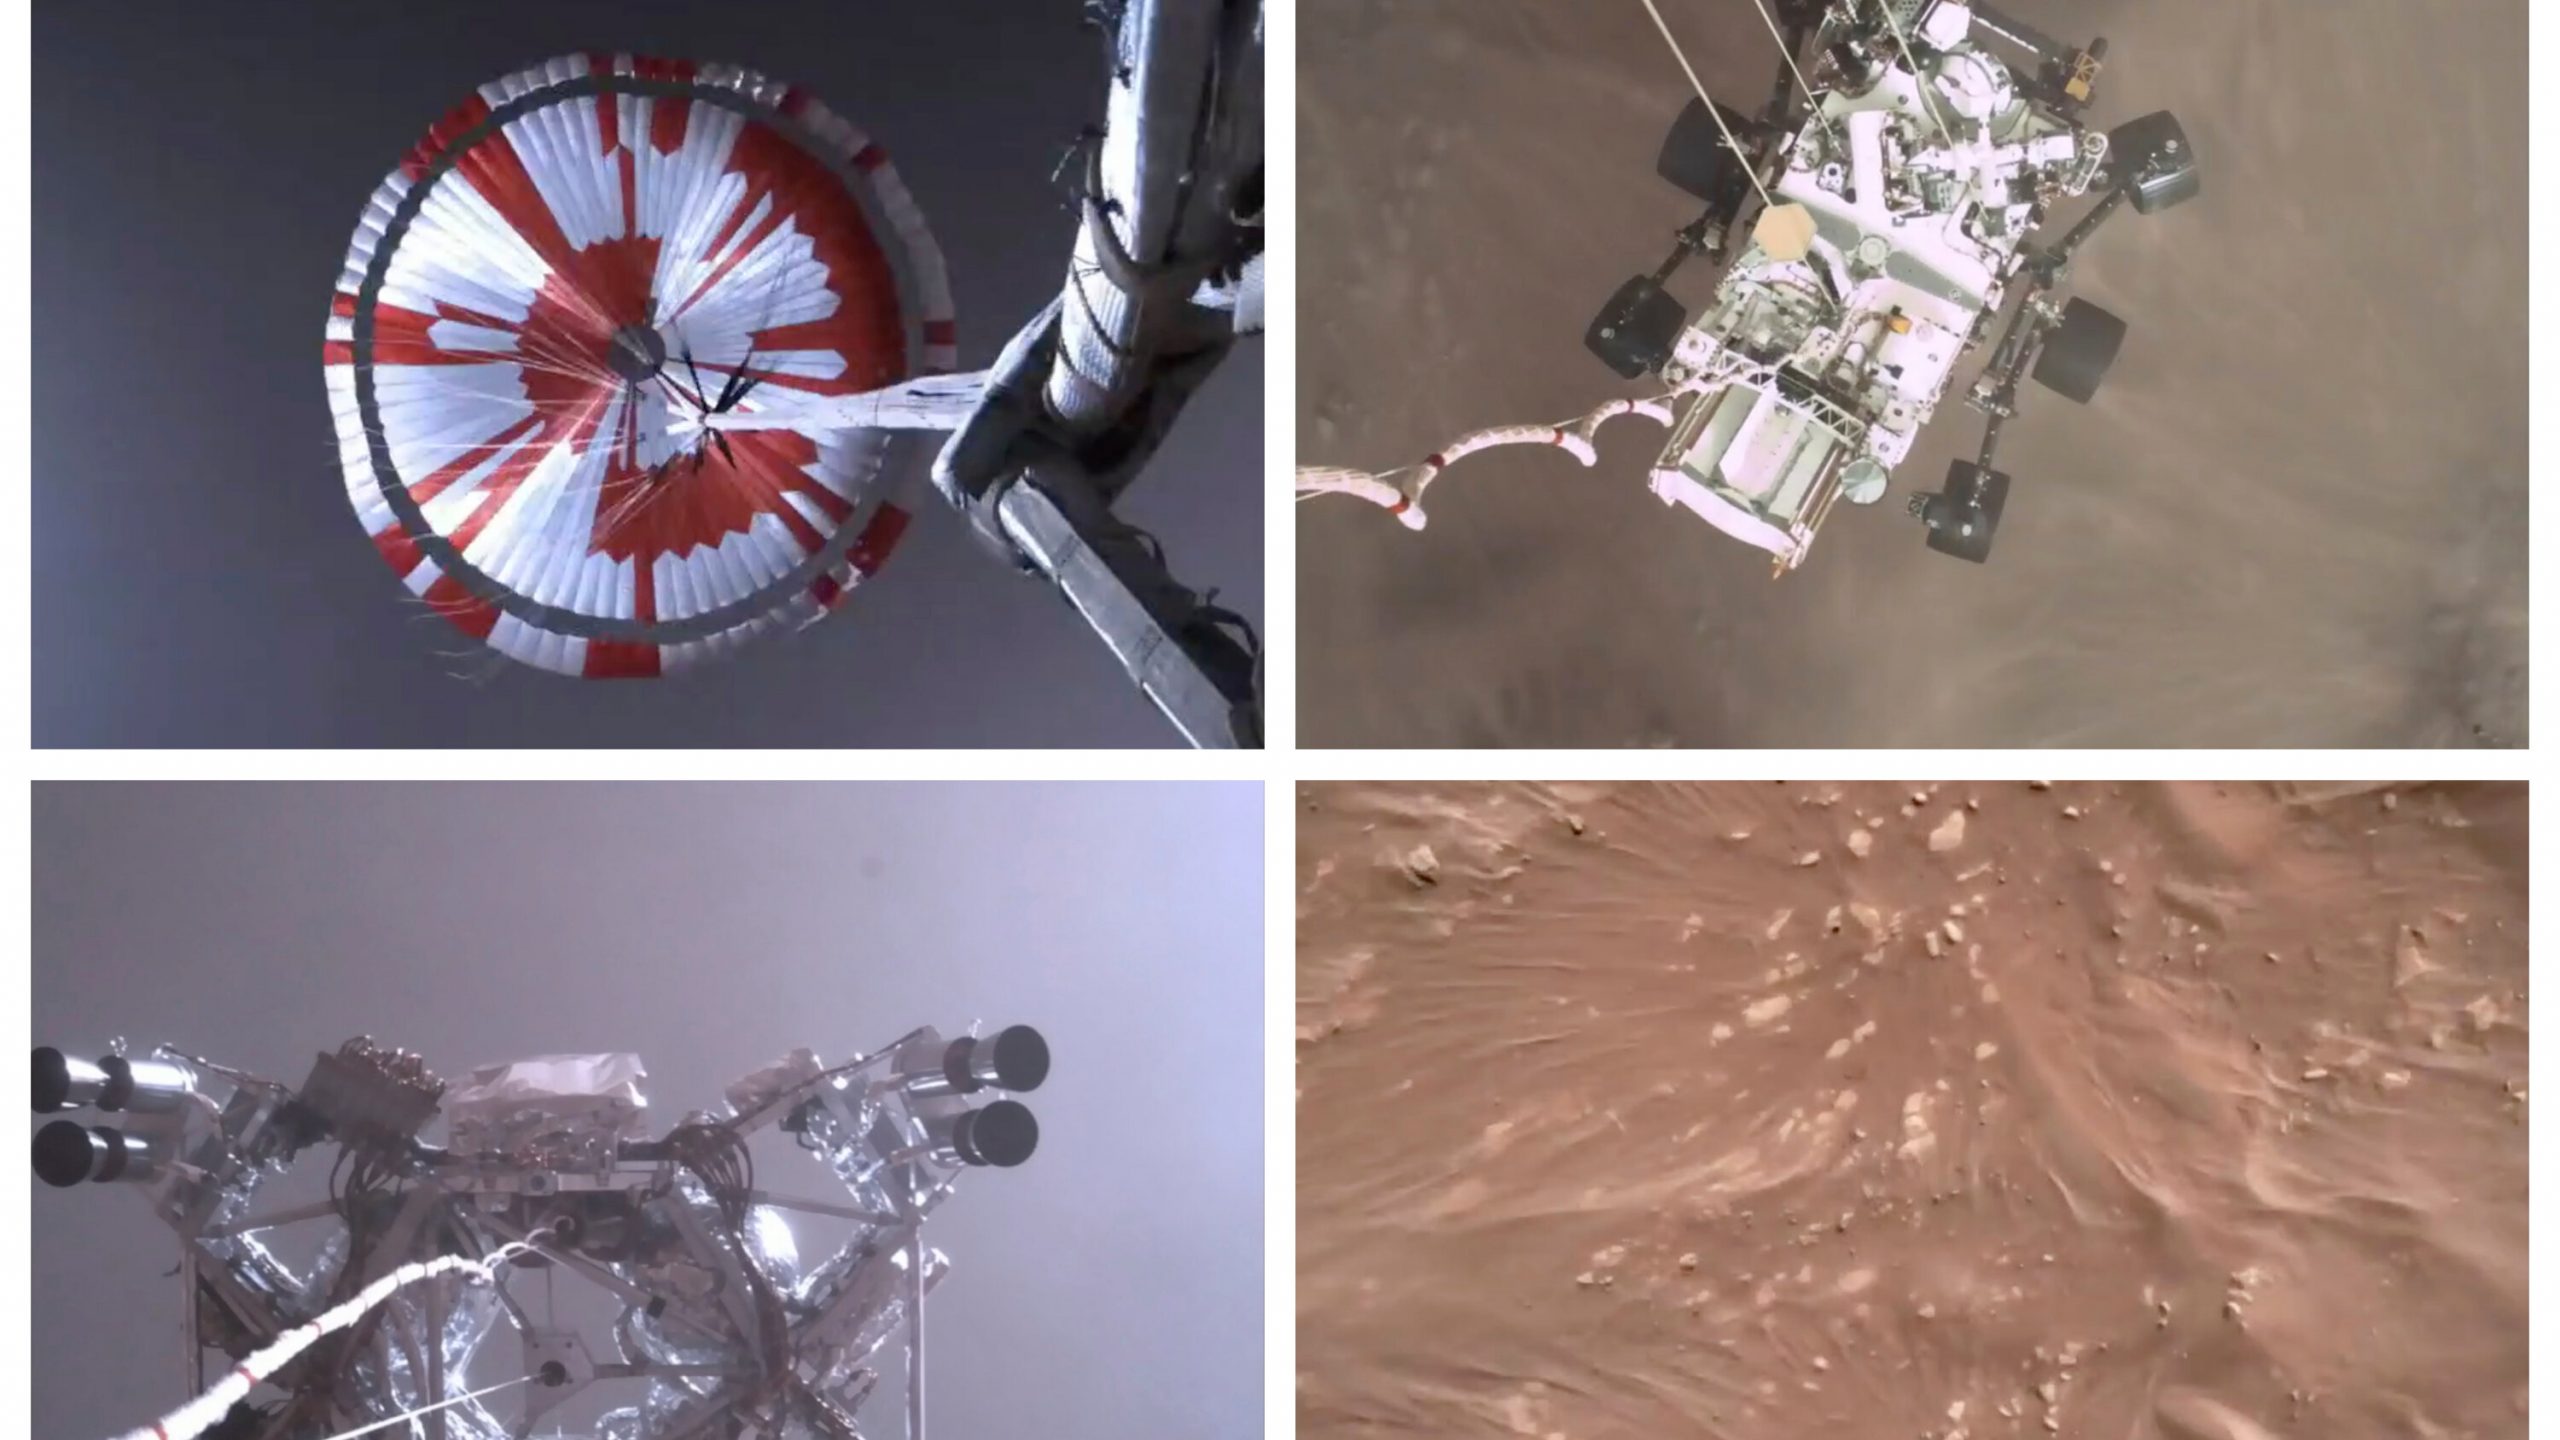 New York: NASA has released a video of the Preservation Rover landing on the surface of Mars.